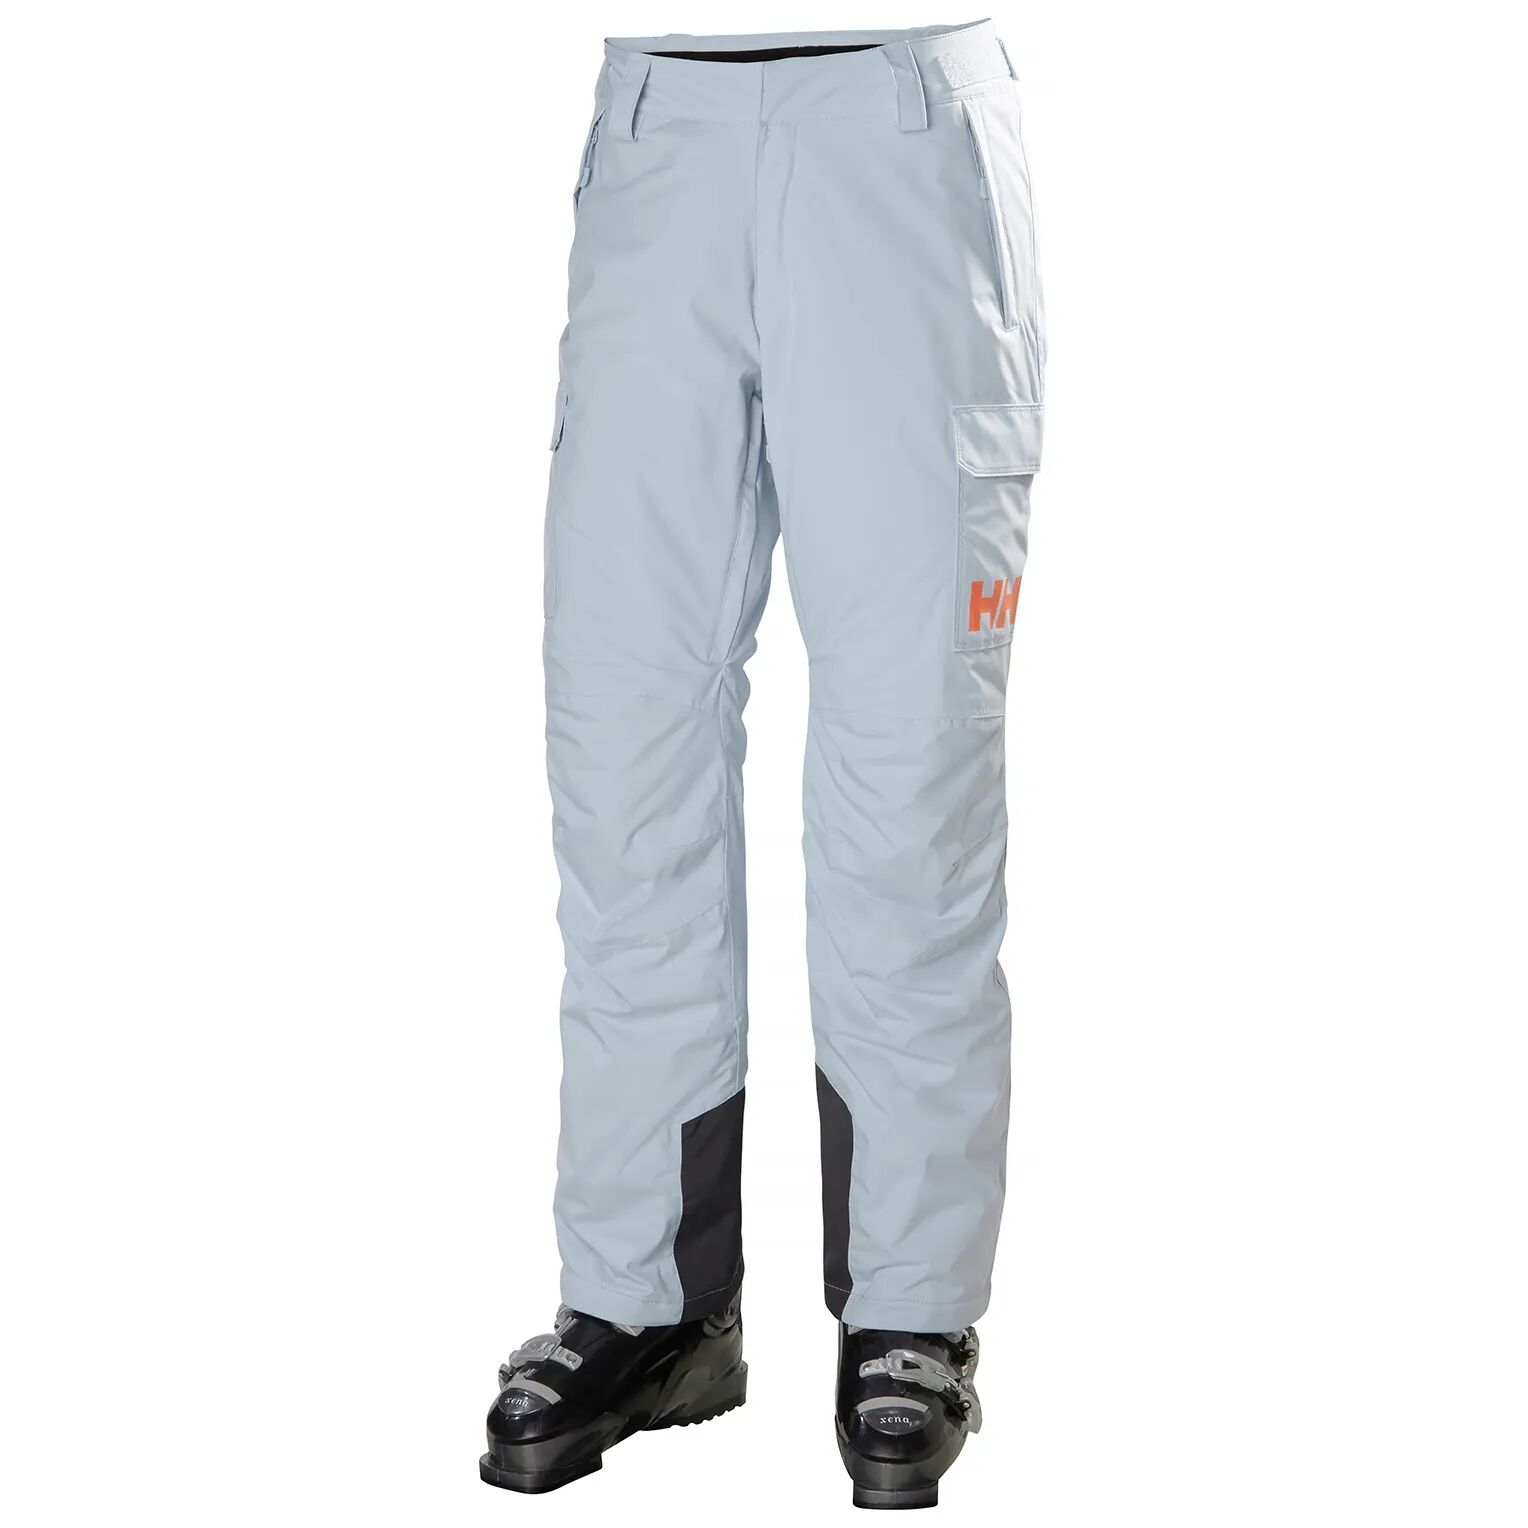 Helly Hansen Dame Switch Cargo Insulated Trousers Skibukse L